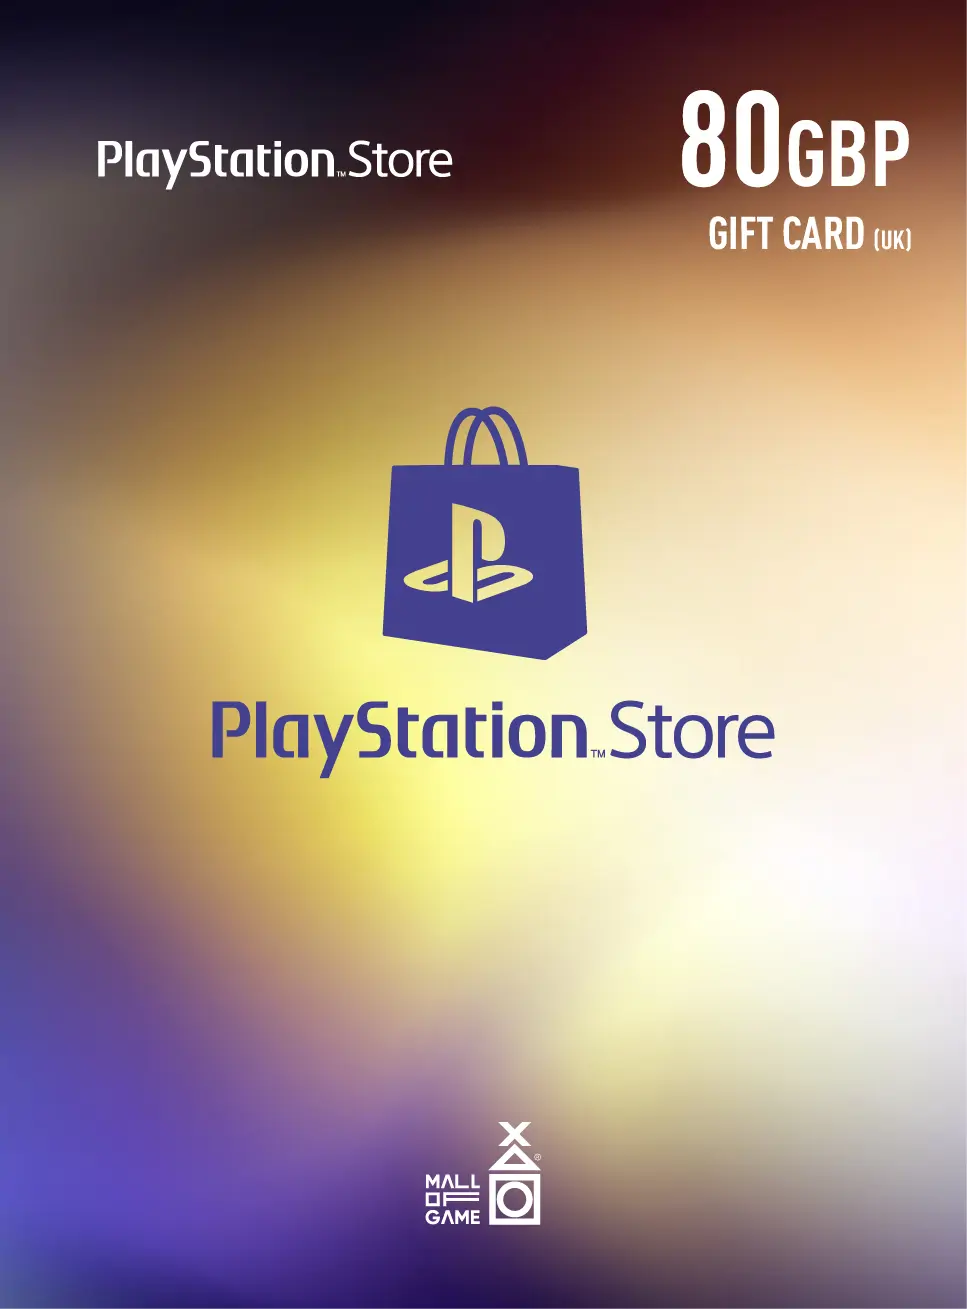 PlayStation™Store GBP80 Gift Cards (UK)